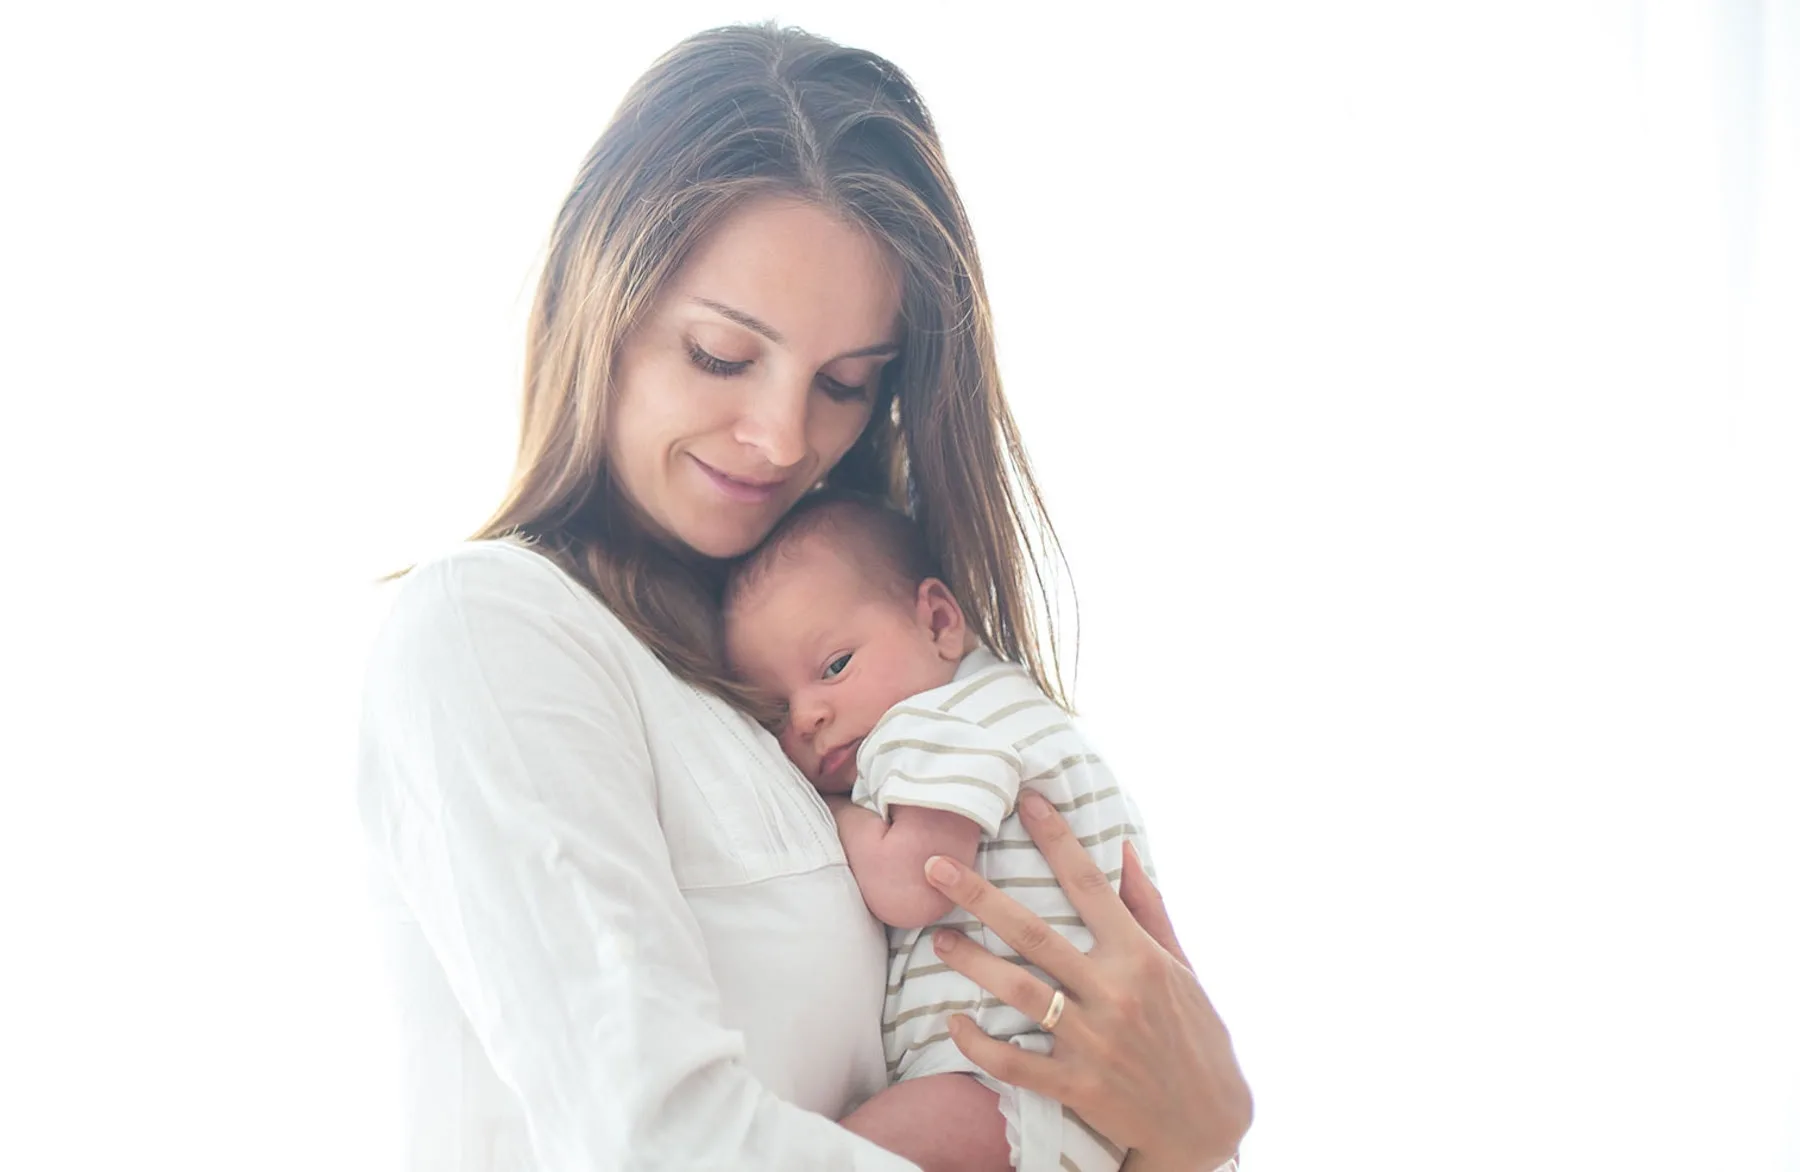 Being mother is something I had always wanted about and thought I would take to naturally. But when I became a mother, I had to give up more than I expected. These are just some of the things I gave up when I became a mother.